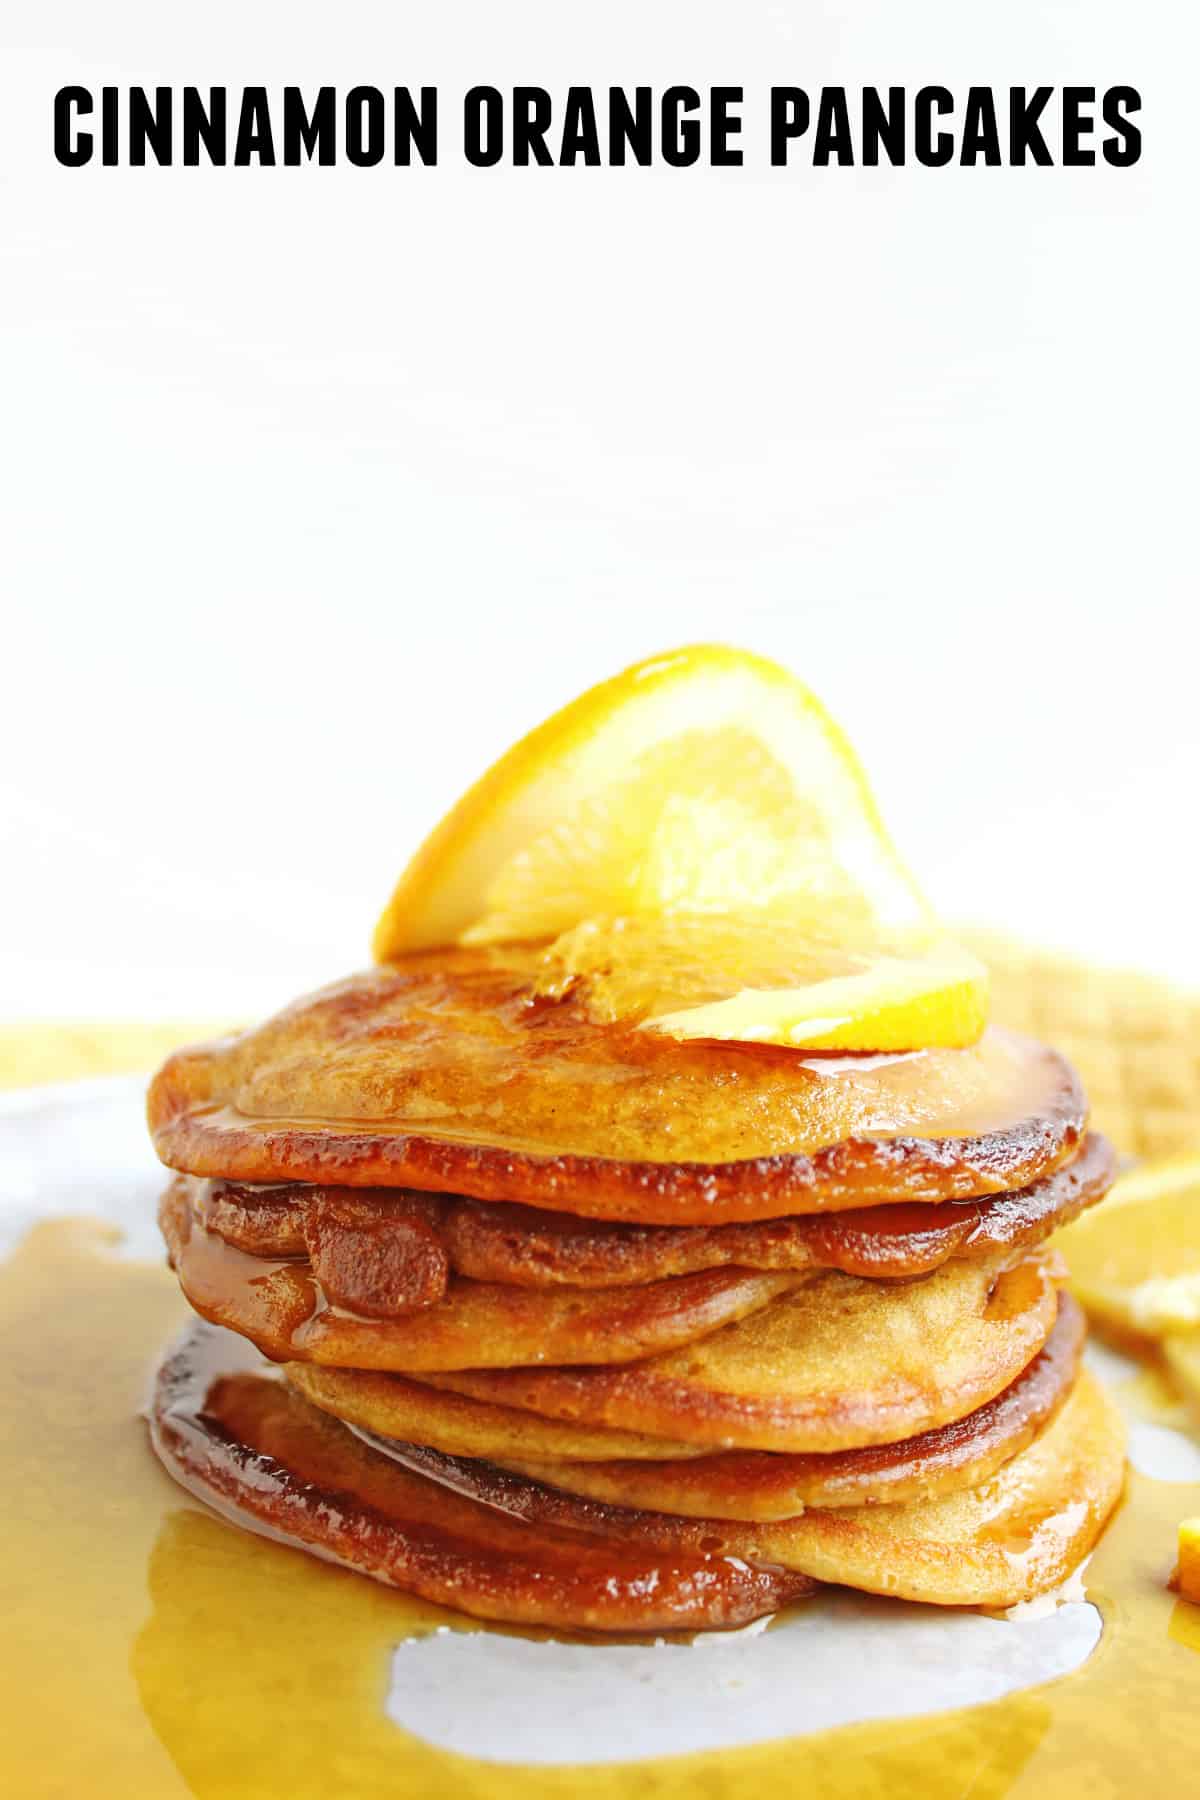 Buttermilk cinnamon orange pancakes recipe! These crispy, old fashioned pancakes are made with buttermilk and a hint of orange and cinnamon. YUM! The perfect holiday breakfast!